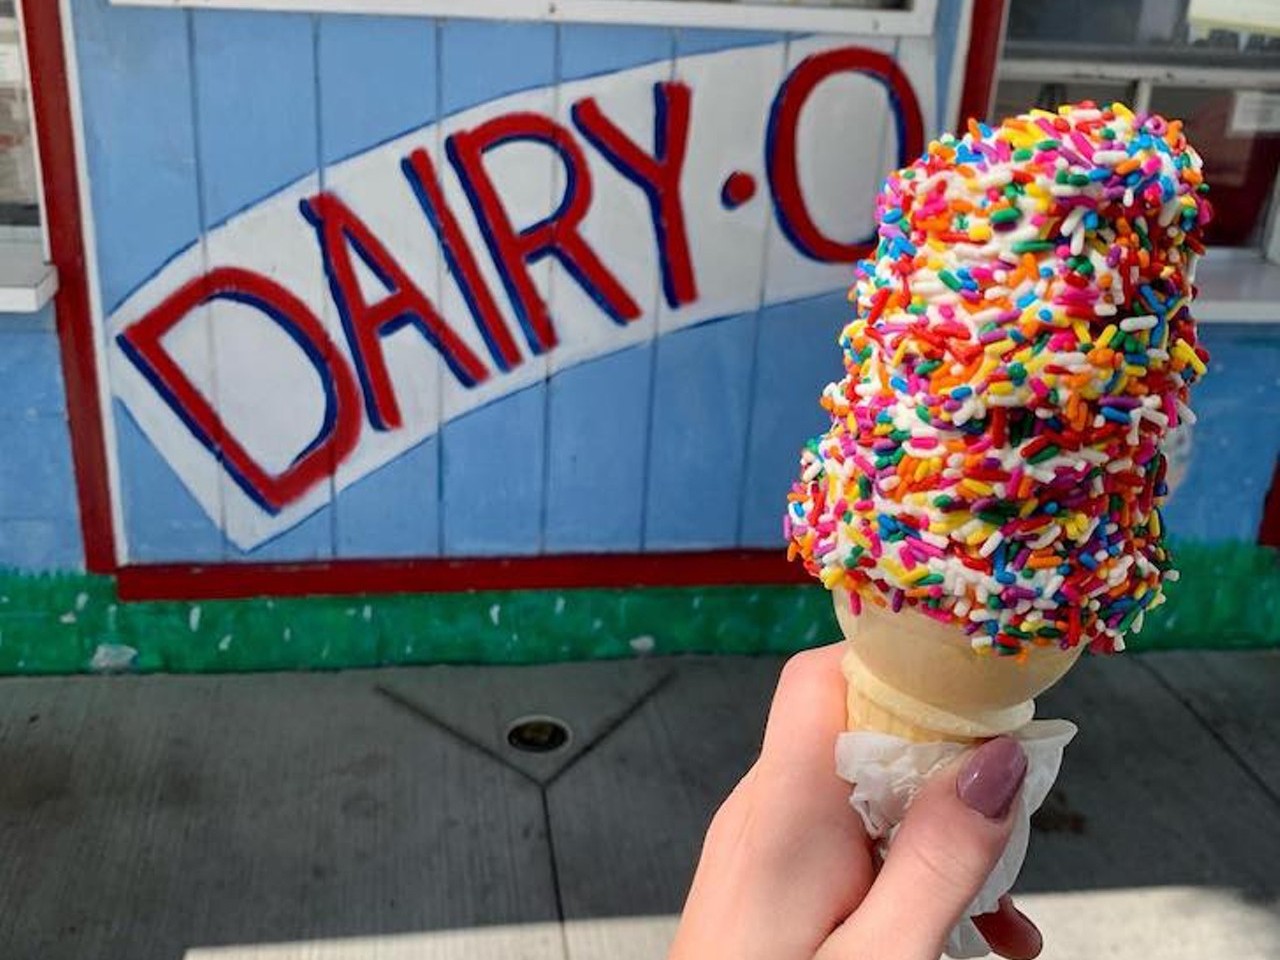 Dairy-O
208 S. Main St., Clawson; 248-916-7700 
Dairy-O is the  ice cream shop of your childhood dreams. Serving up cones, sundaes, floats, coolers, flurries, glaciers, slushies, and smoothies, all of which can be topped and drizzled upon.